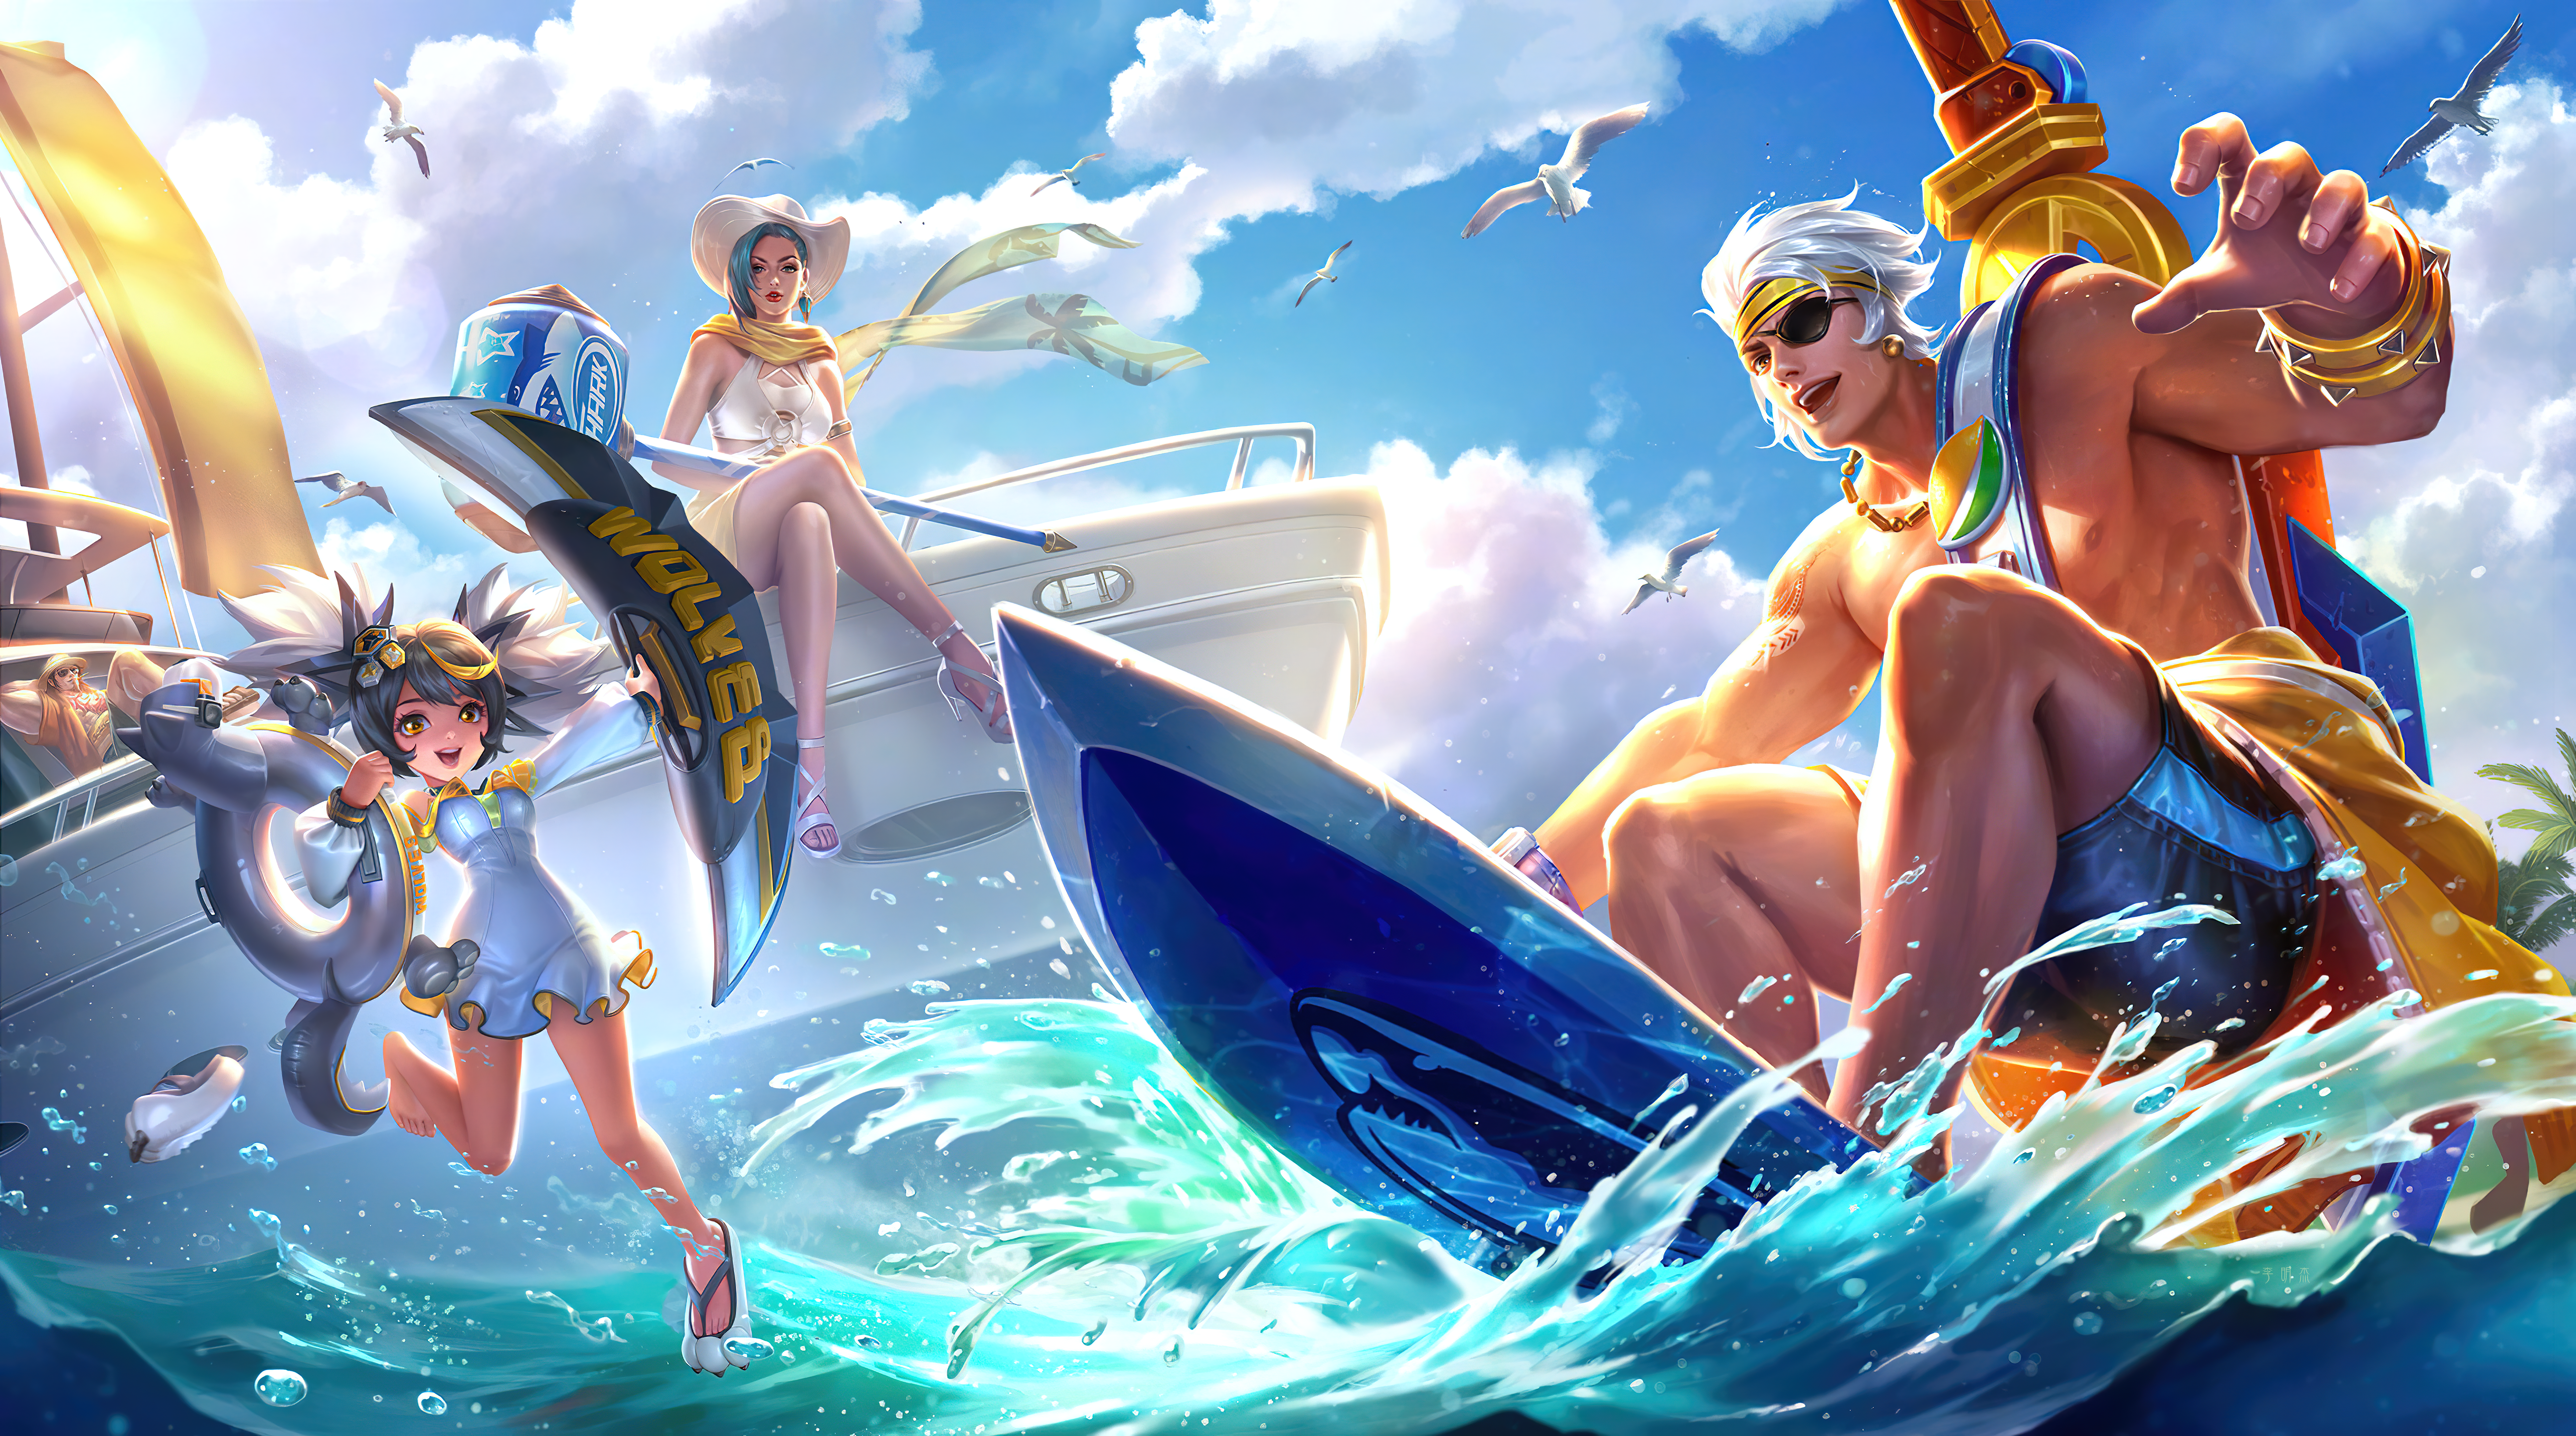 Ocean View Summer Dress Girl In Armor Mobile Legends Video Game Characters 5167x2880